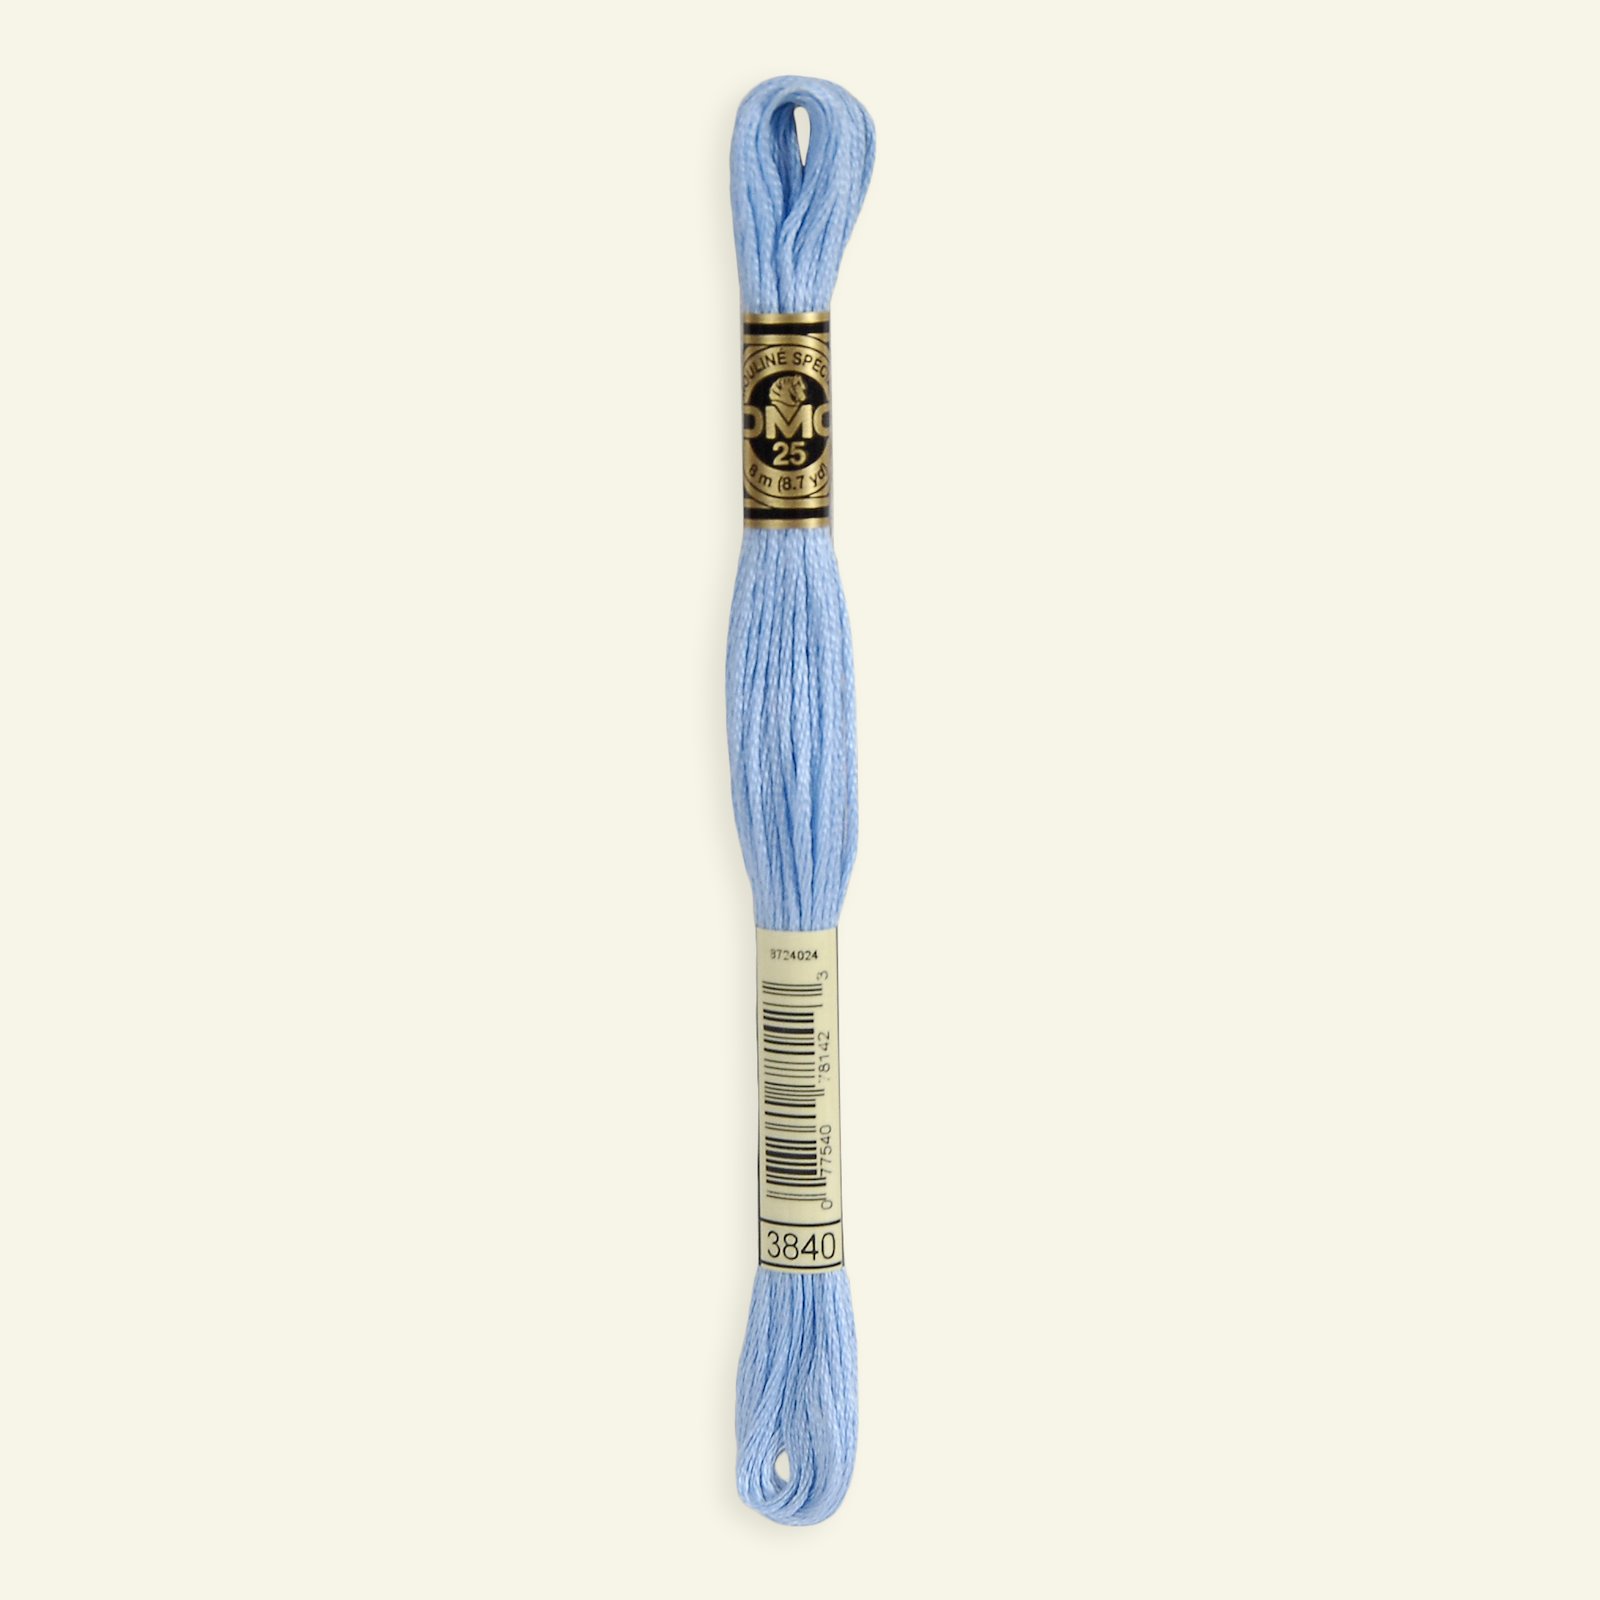 The Urban Store Embroidery Thread Light Lavender Blue DMC 3840 RRP £1.40 CLEARANCE XL 99p